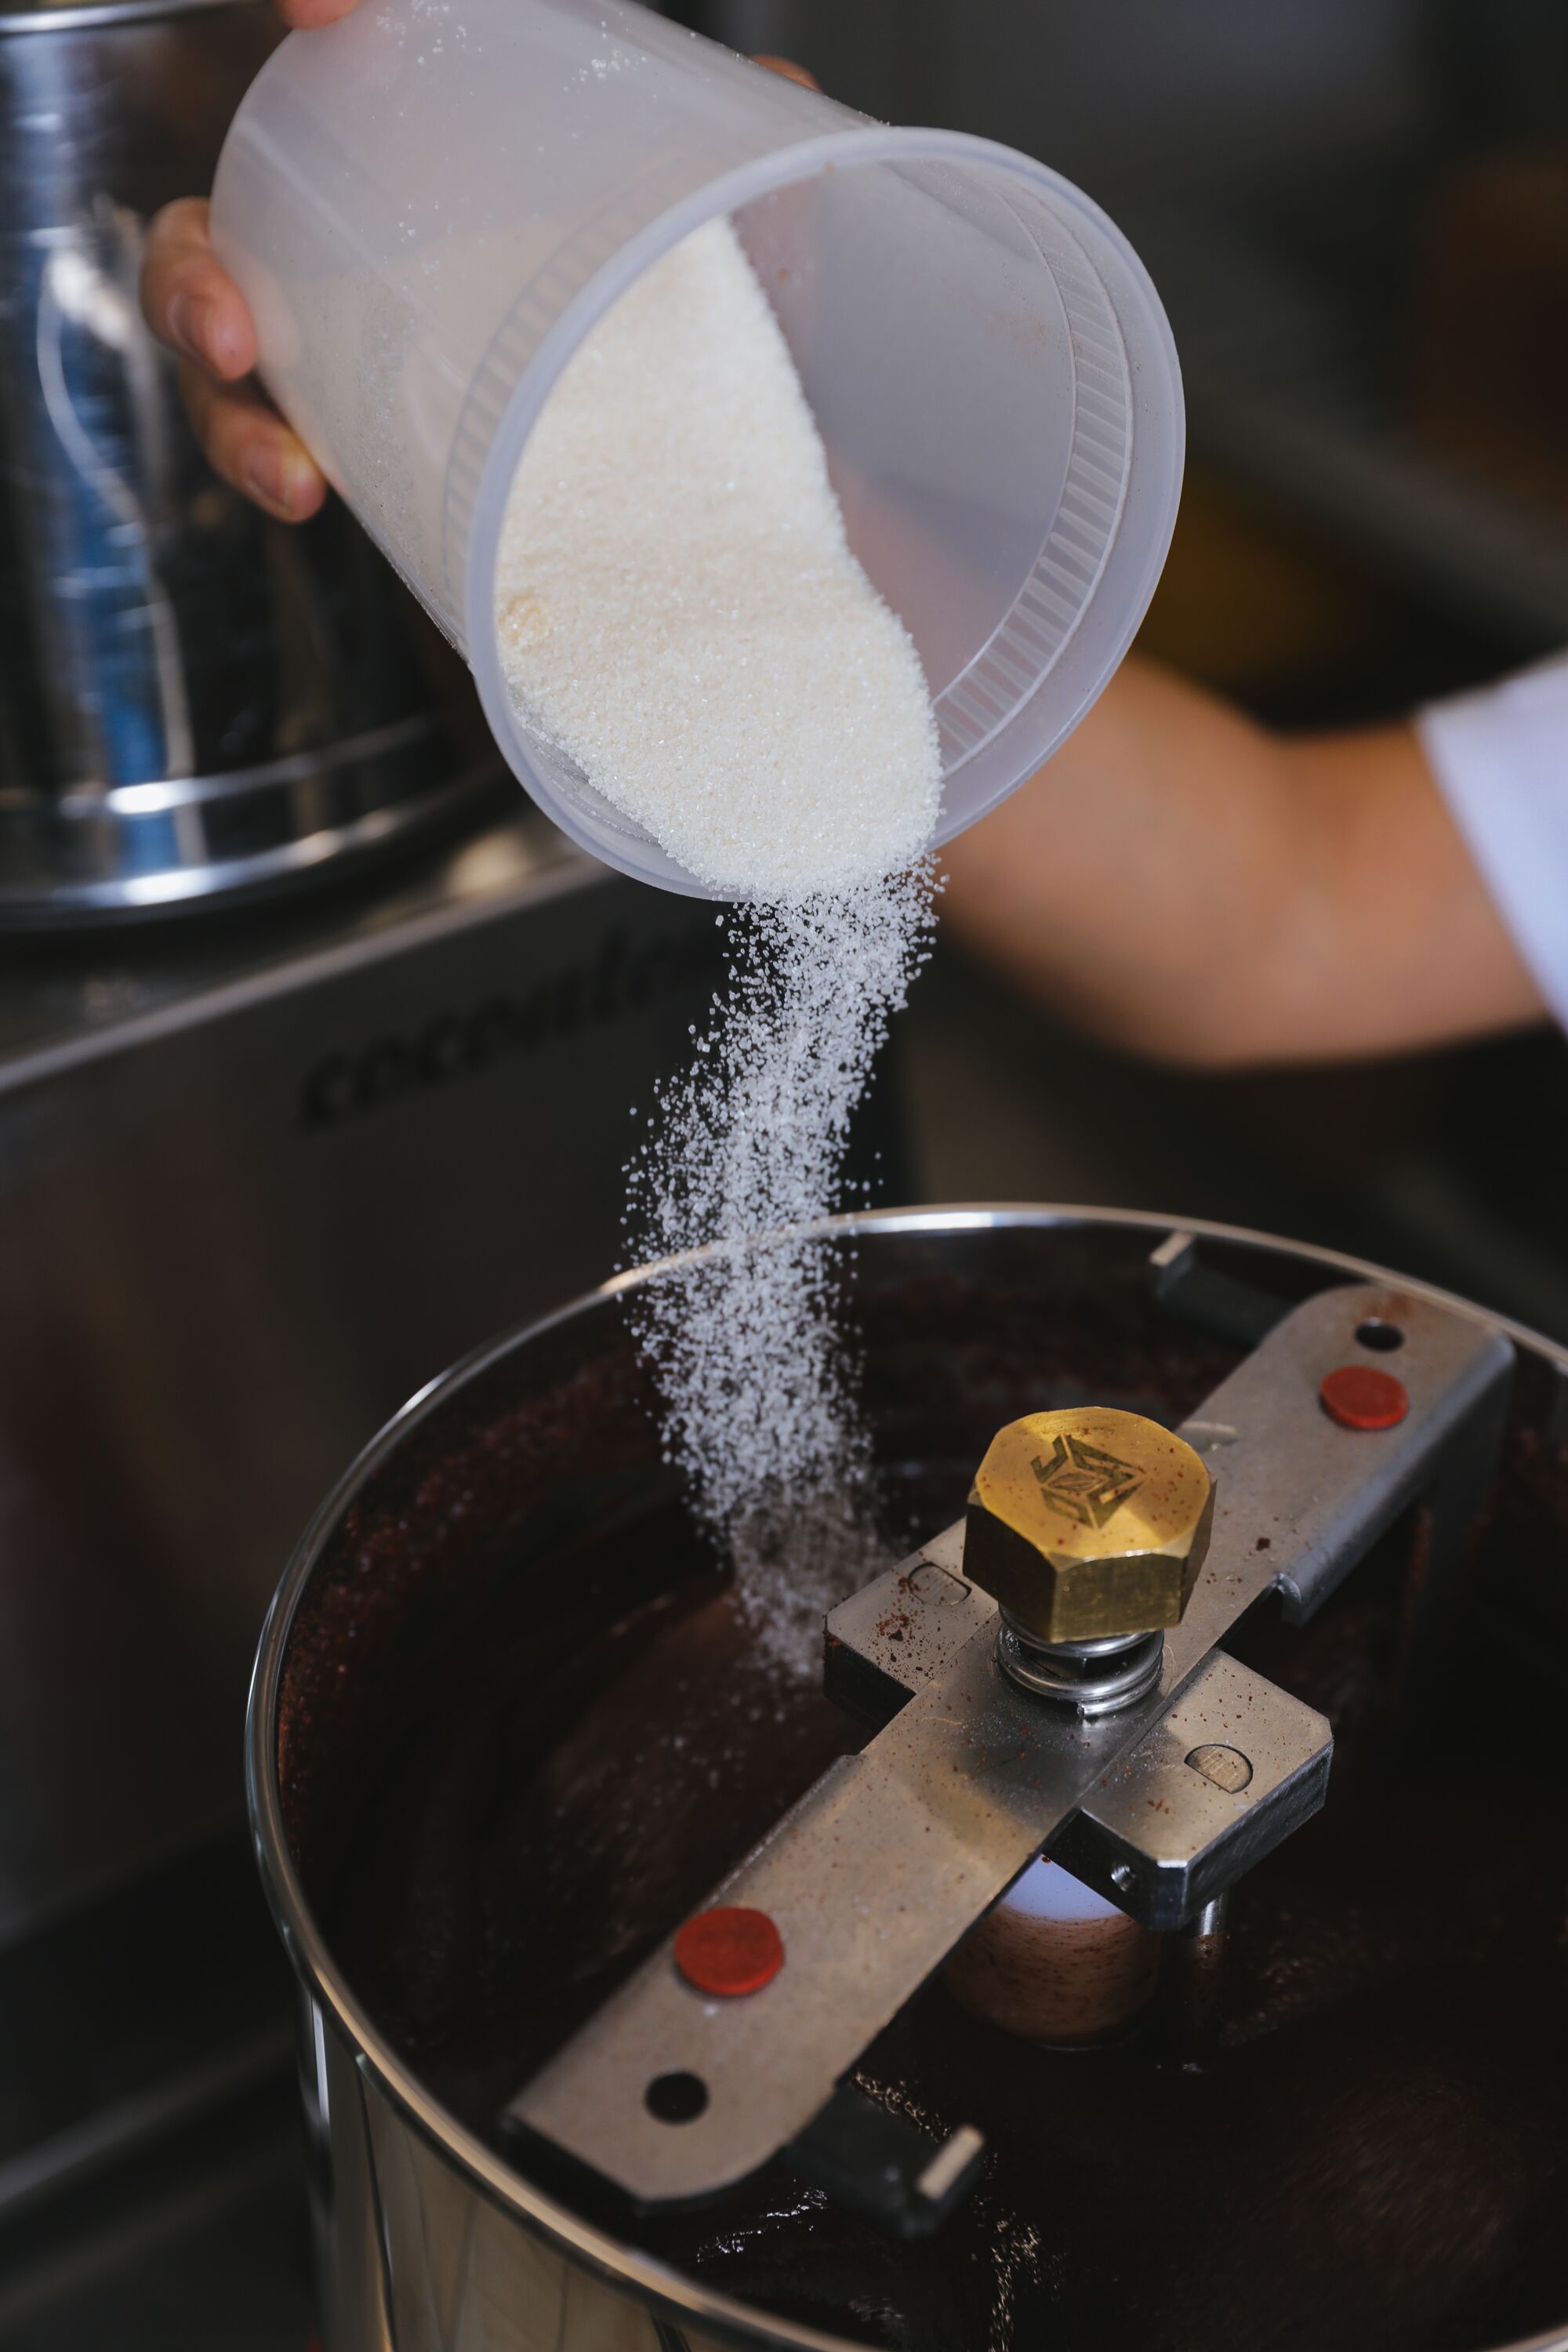 A hand pours sugar from a container into a mixing machine.